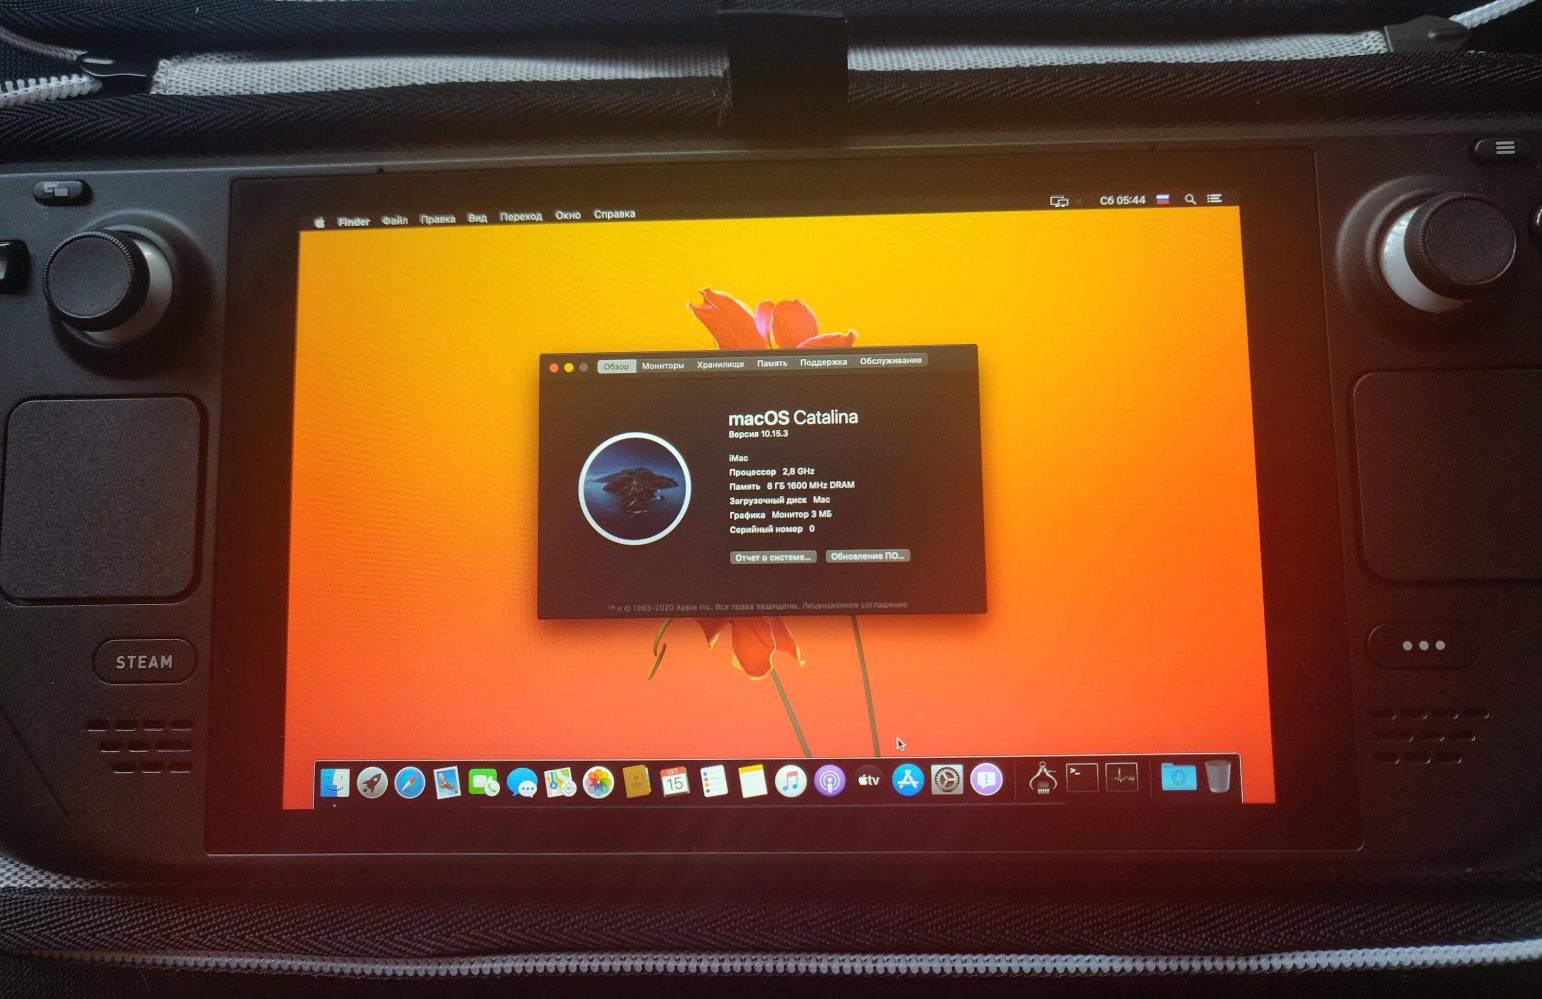 Stage manager on iPad may be a mess, but this steam deck console can run macOS